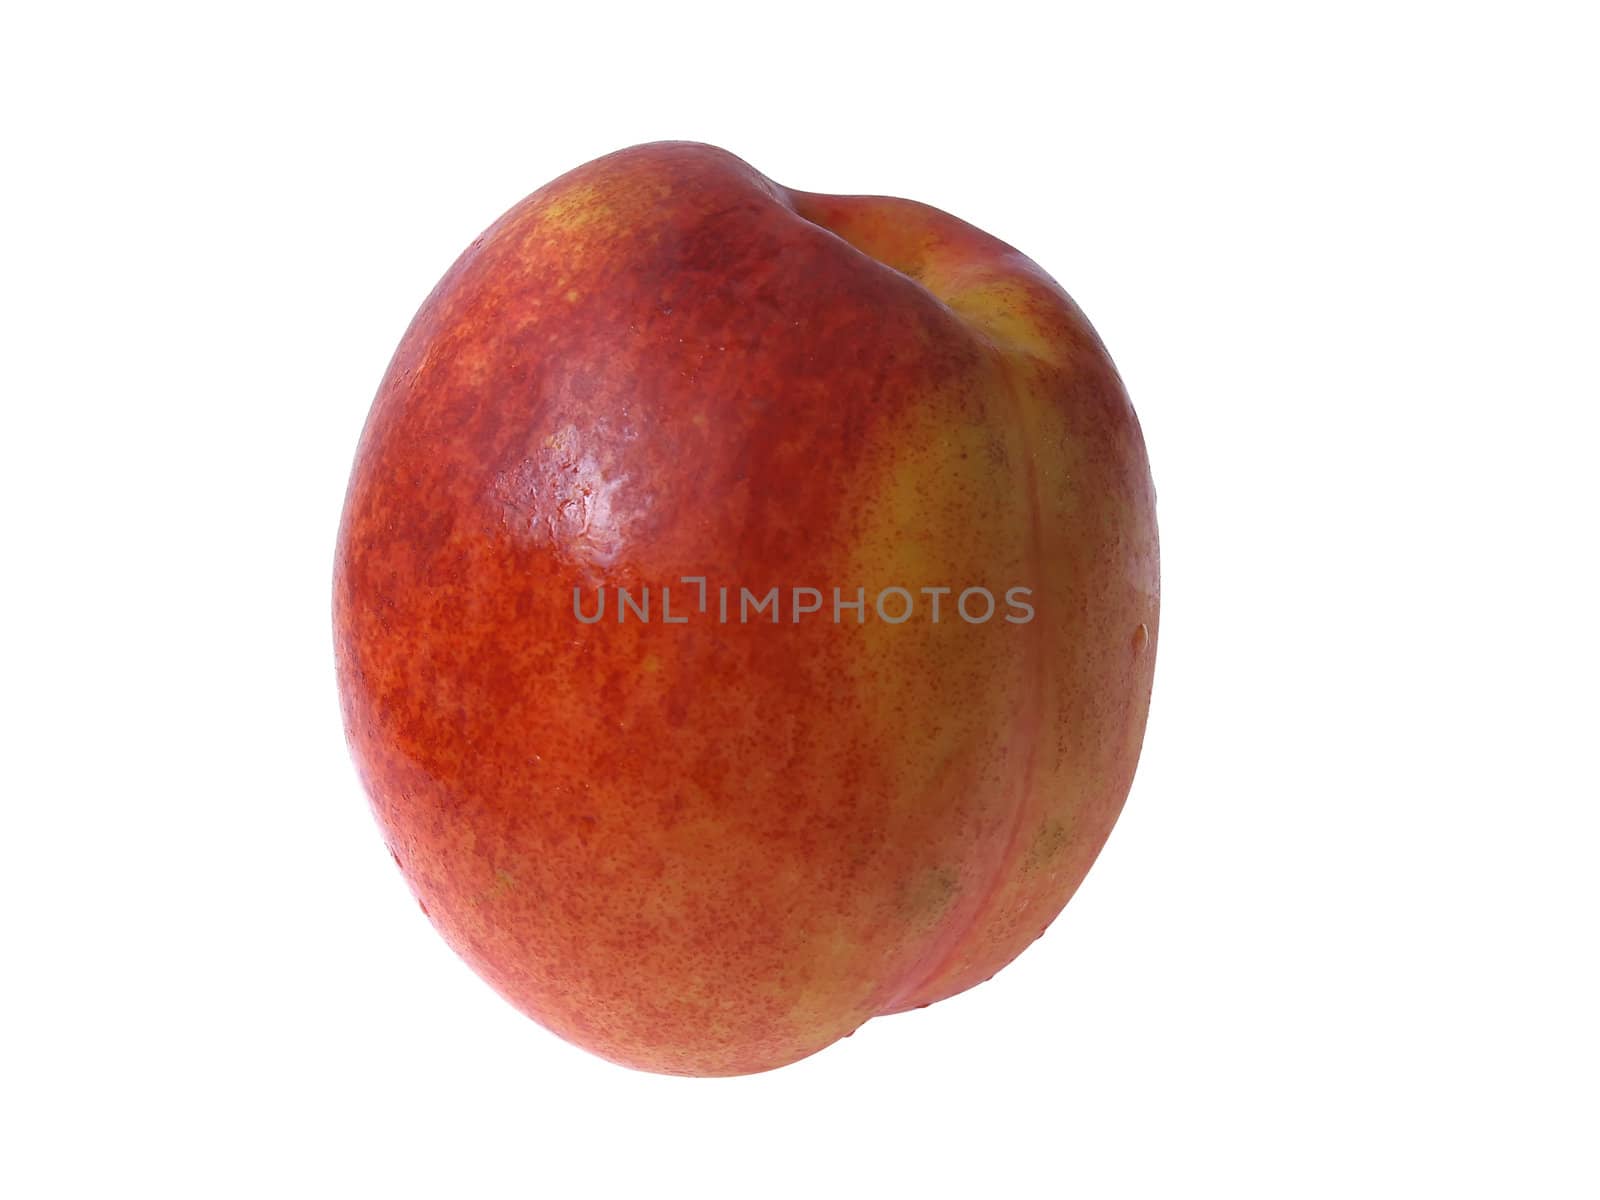 Tasty juicy nectarine on a white background with clipping mask. Shadows is not included in clipping mask